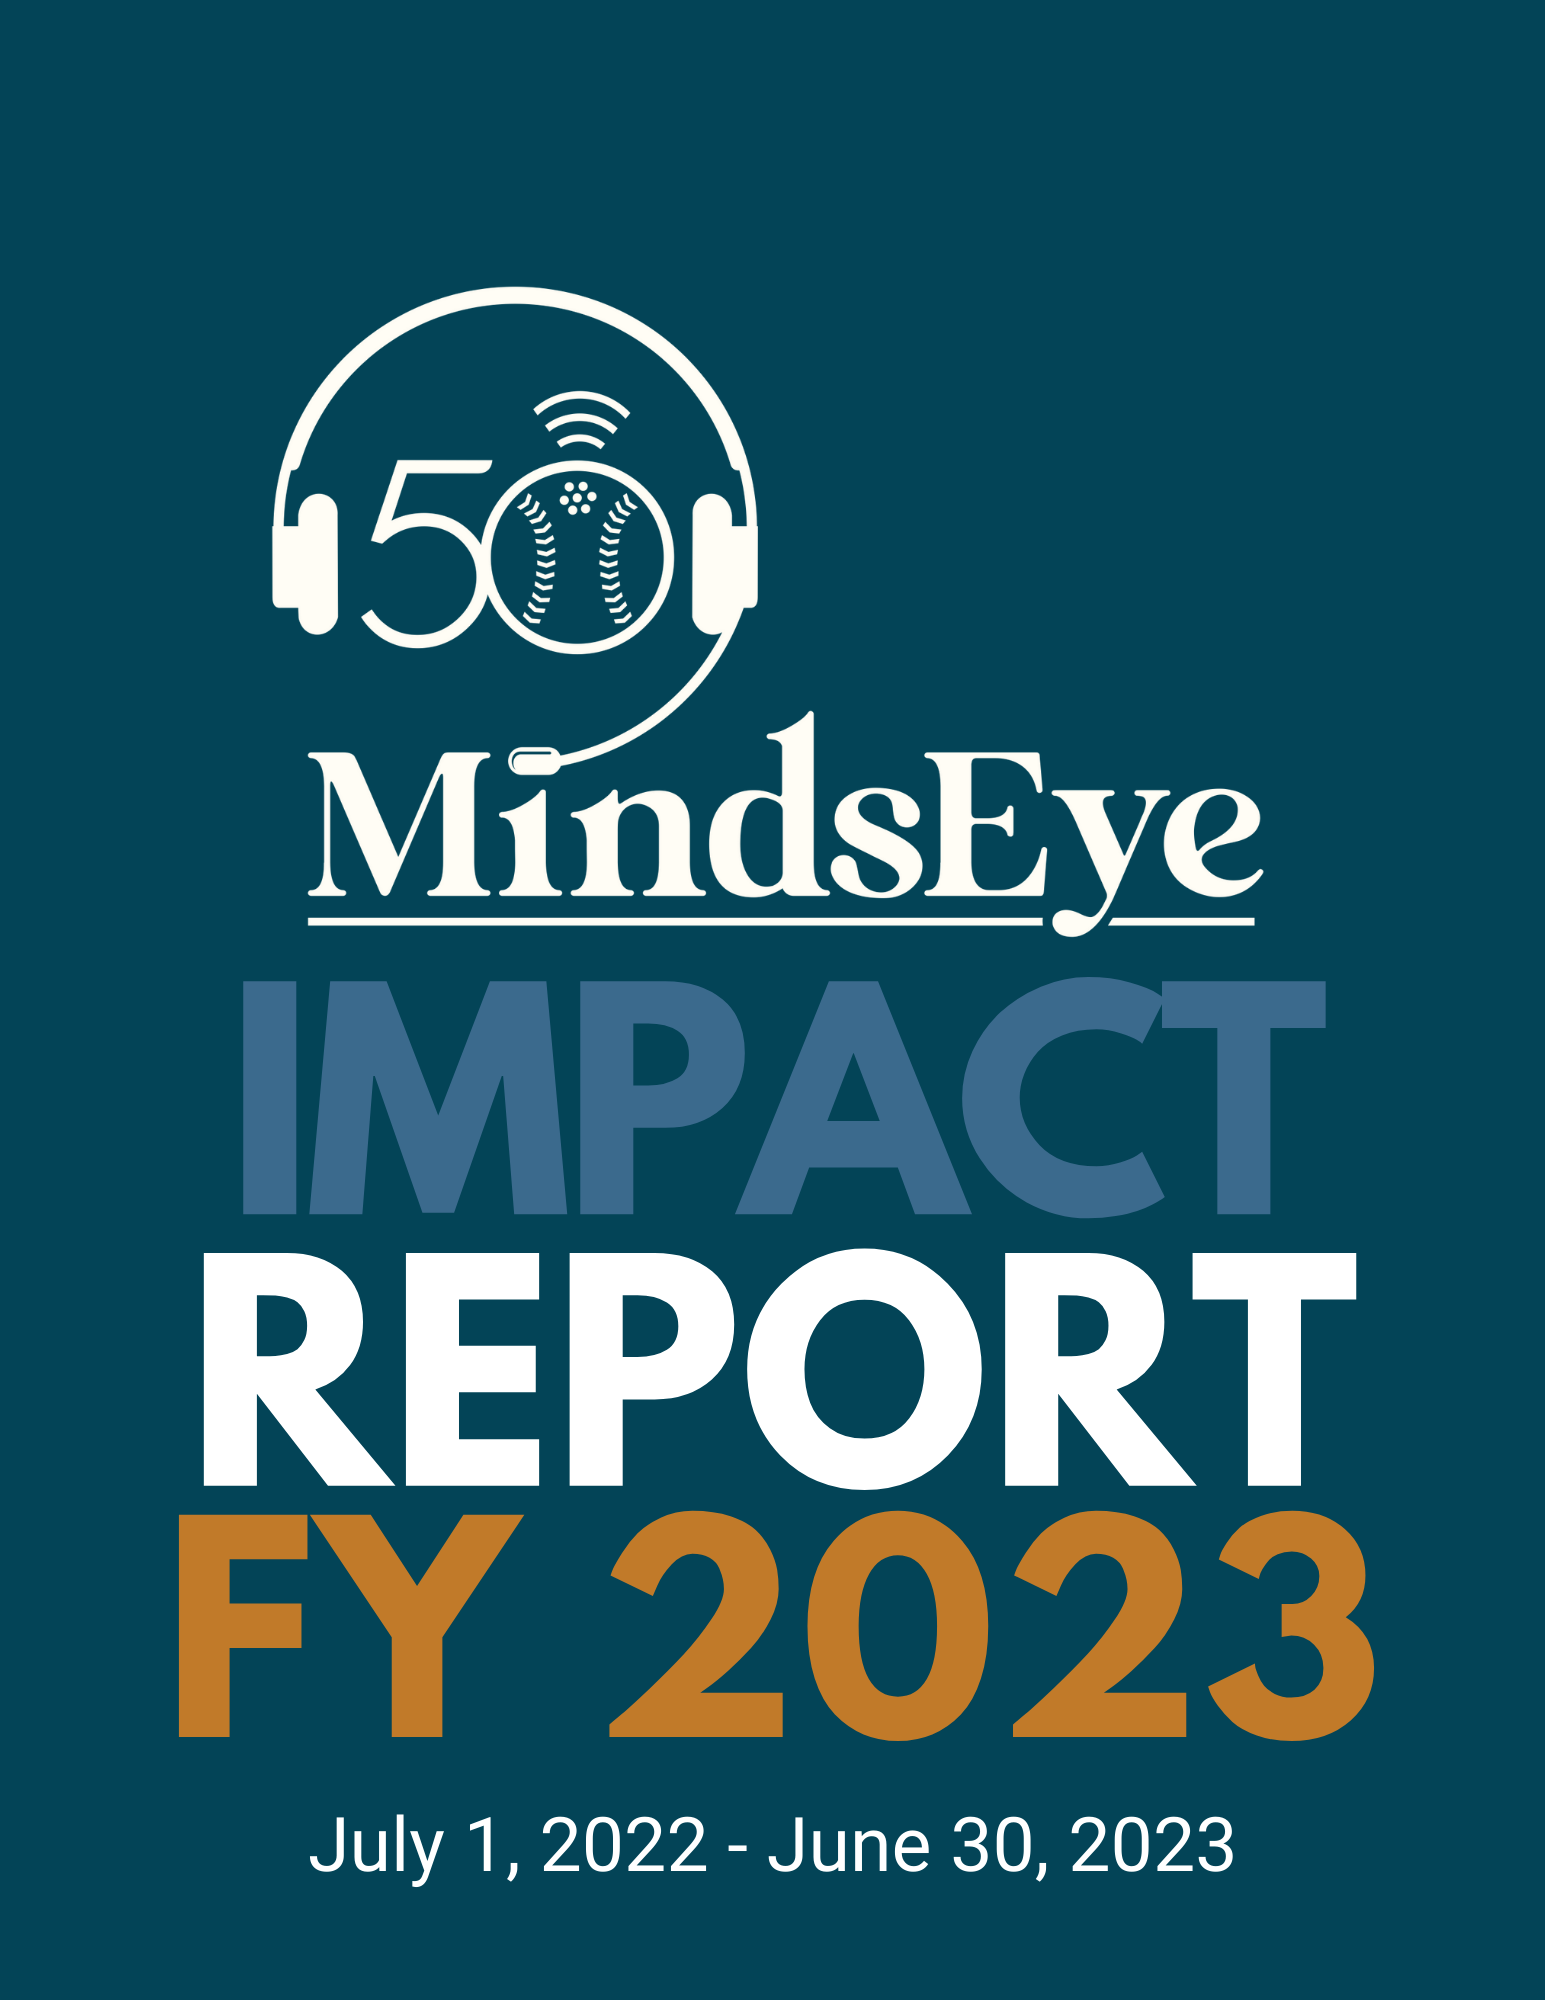 MindsEye 50th Anniversary logo, Text, Impact Report FY 2023, July 1, 2022 - June 30, 2023.